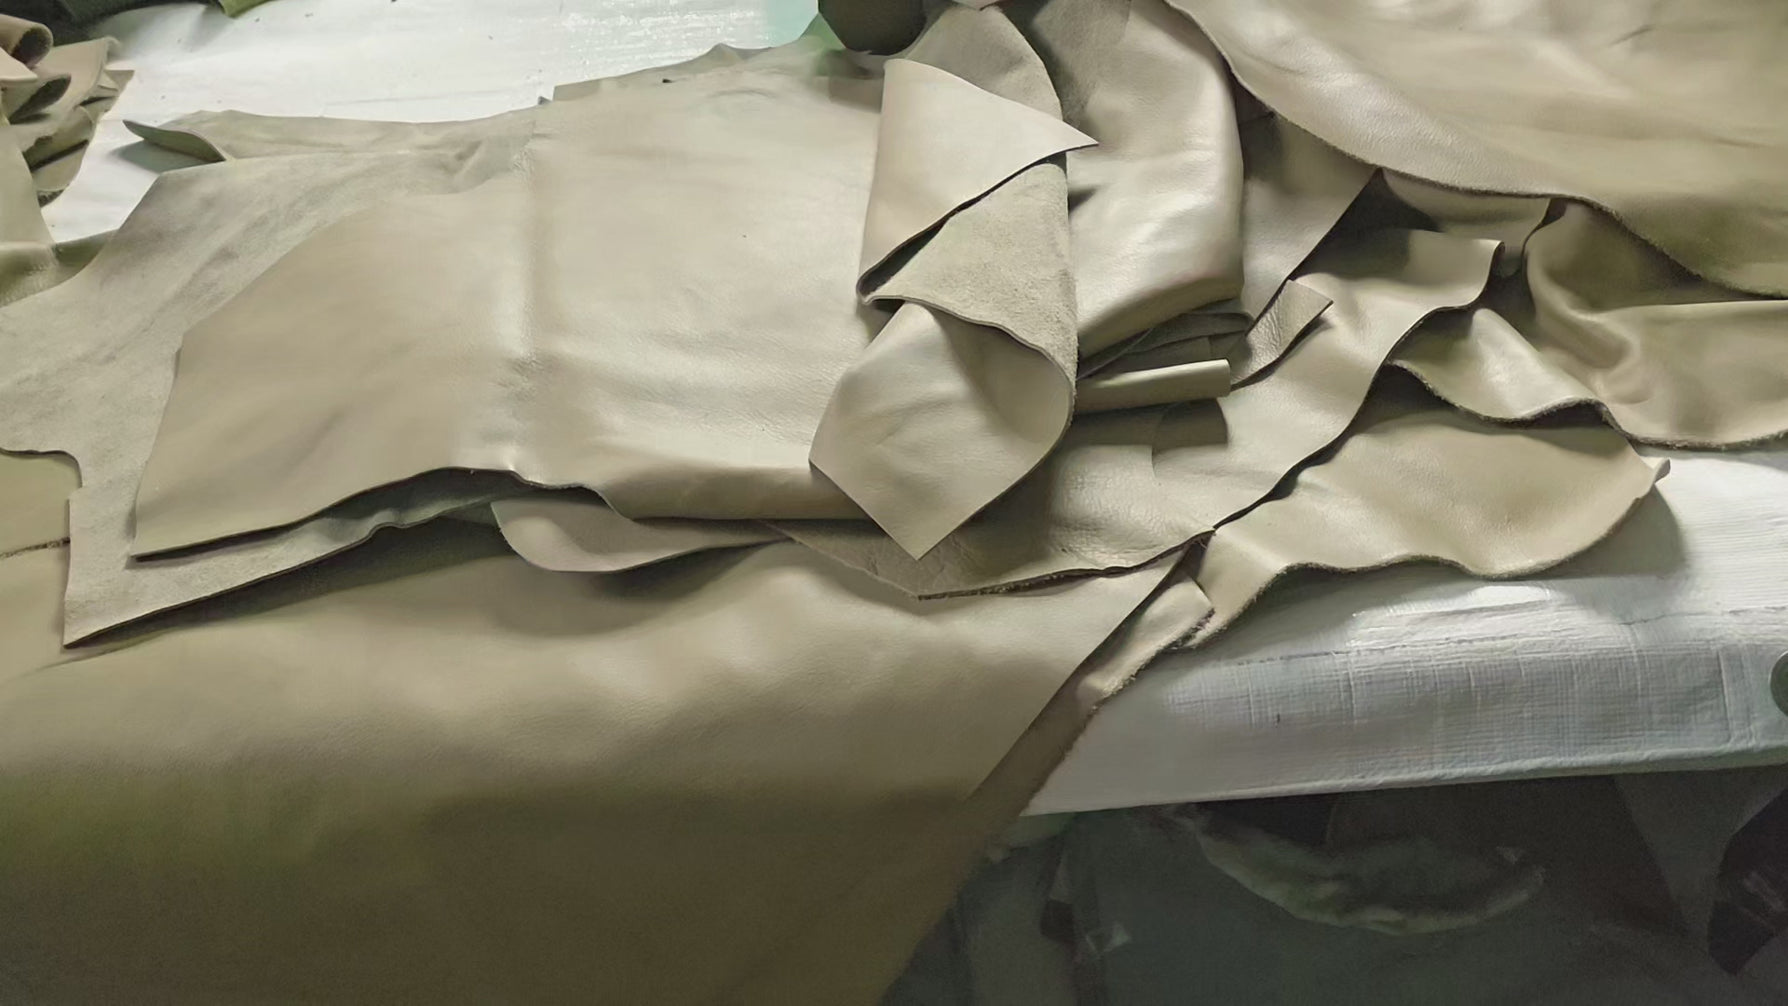 Olive Green Leather Scraps for Crafts | 1-2 sq. ft.$35.00